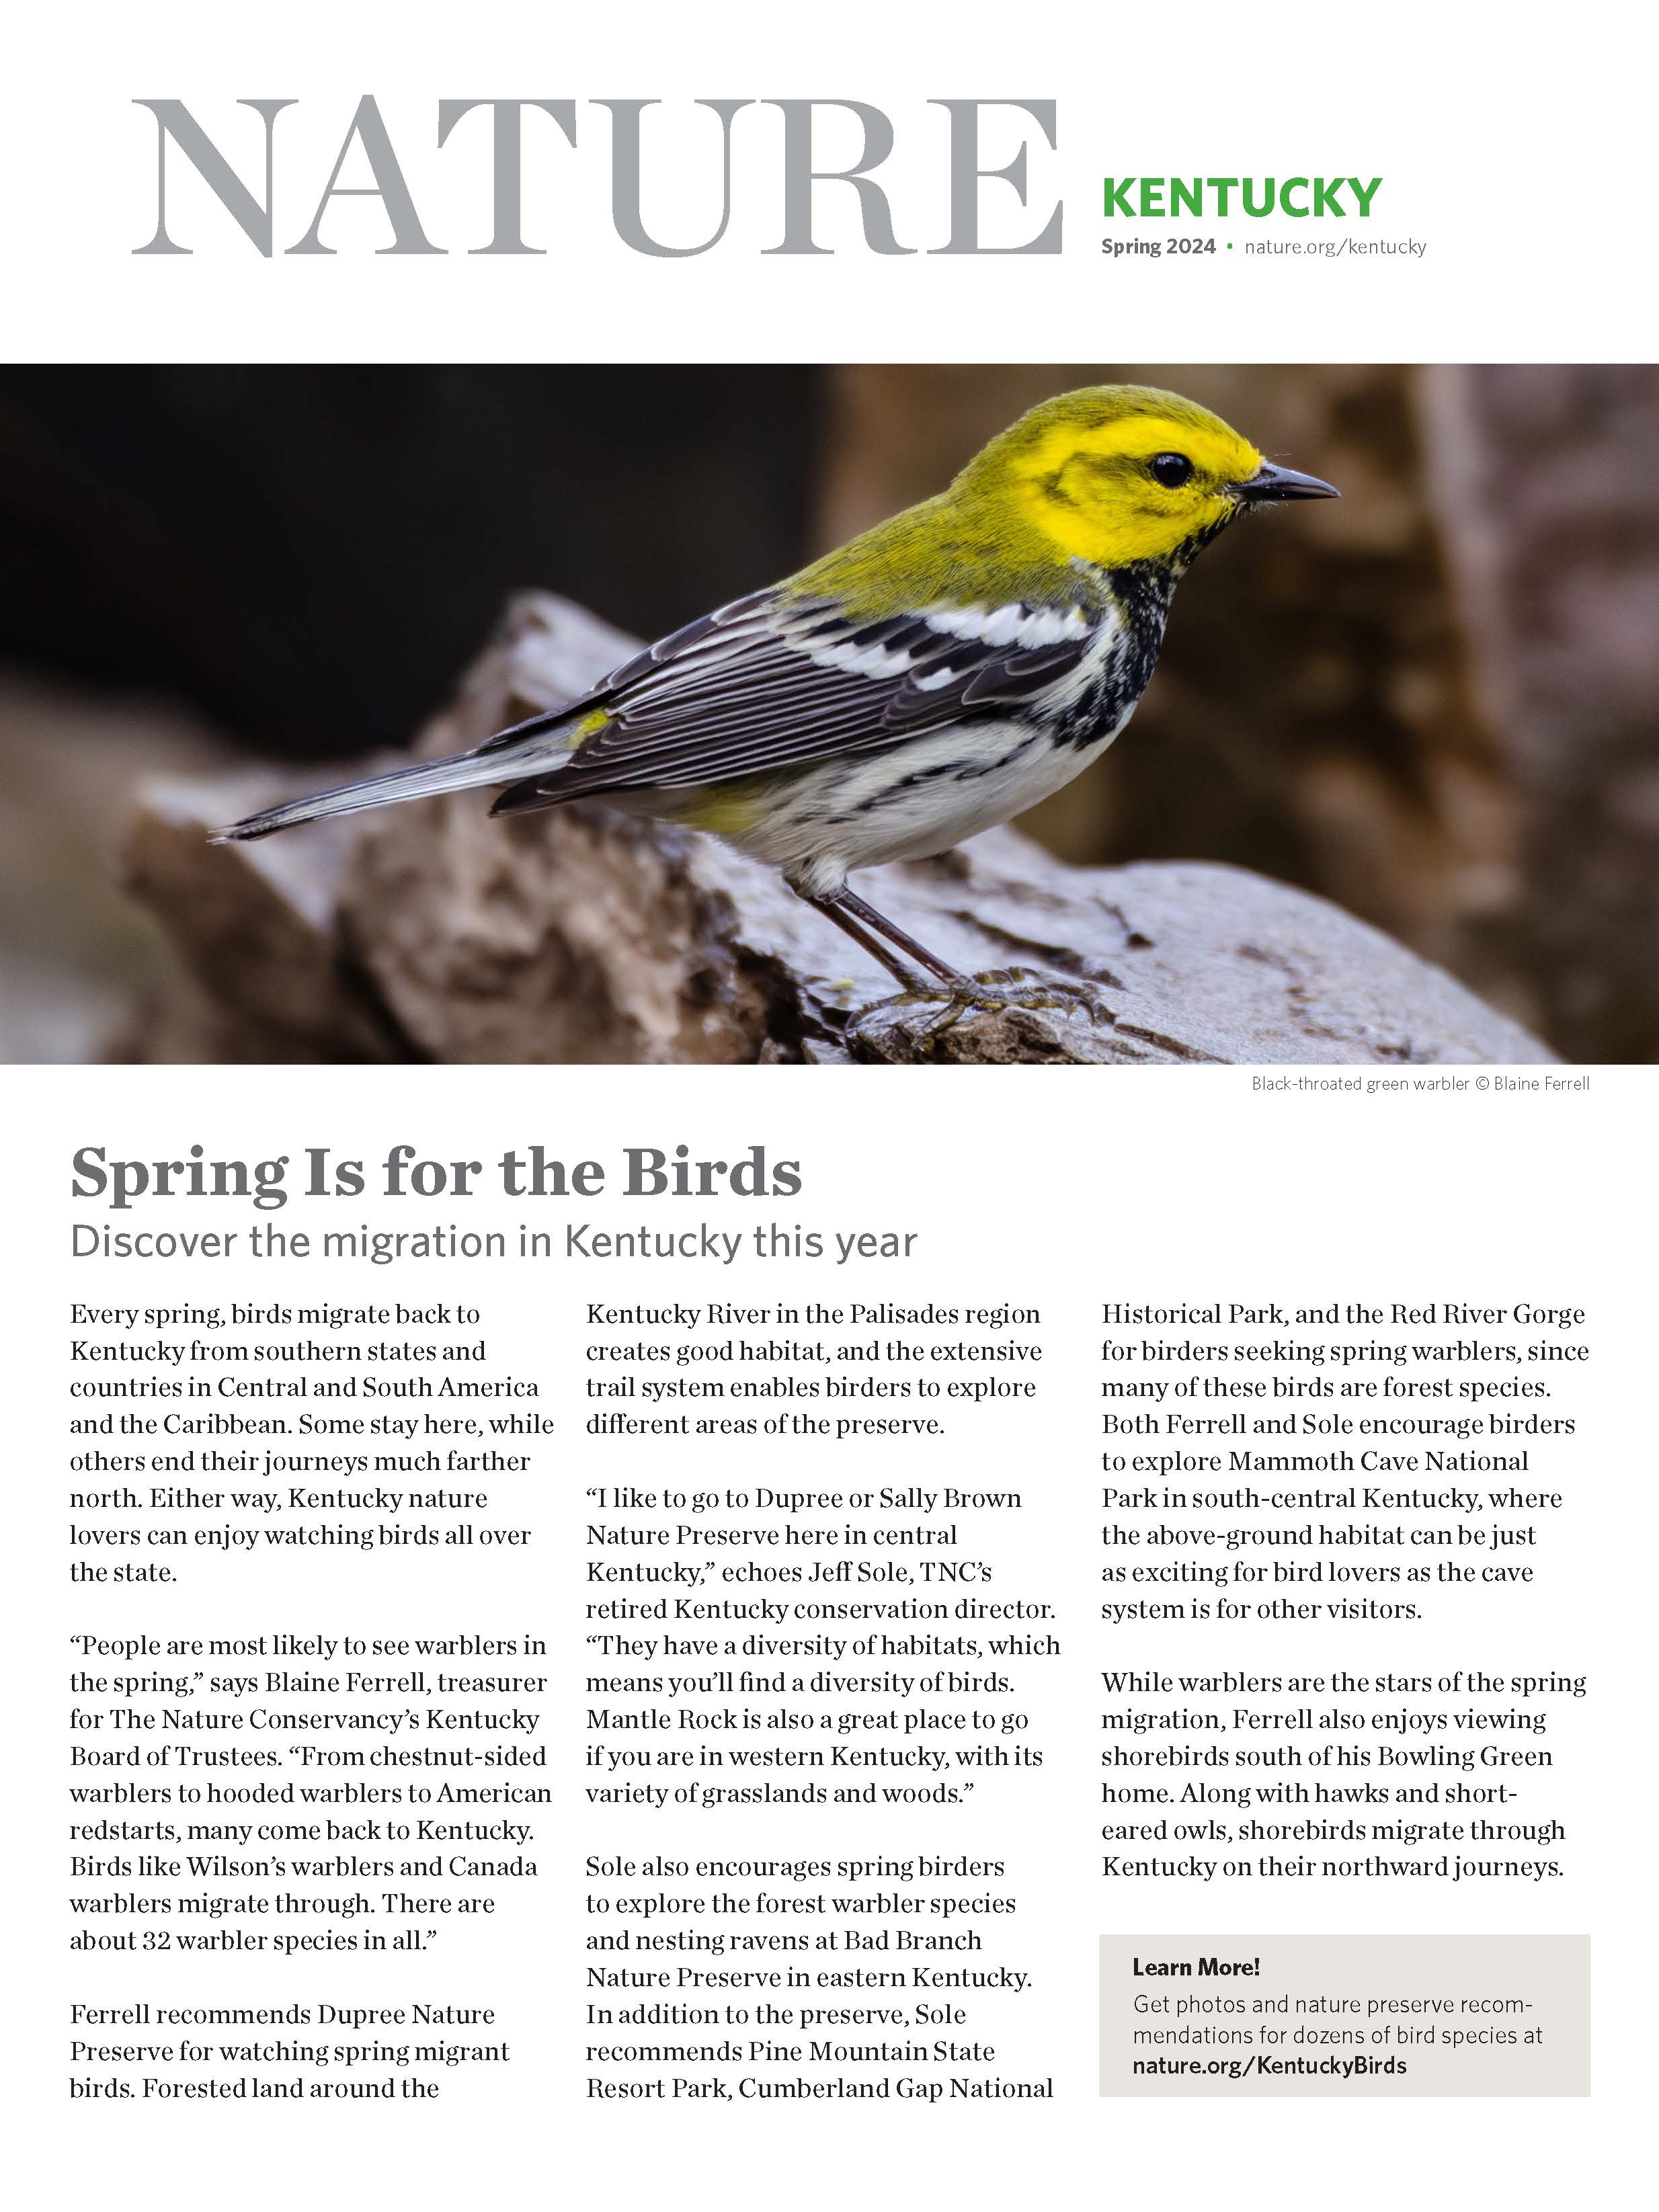 Page 1 of TNC in Kentucky's magazine insert with a yellow and black bird at the top and text underneath.